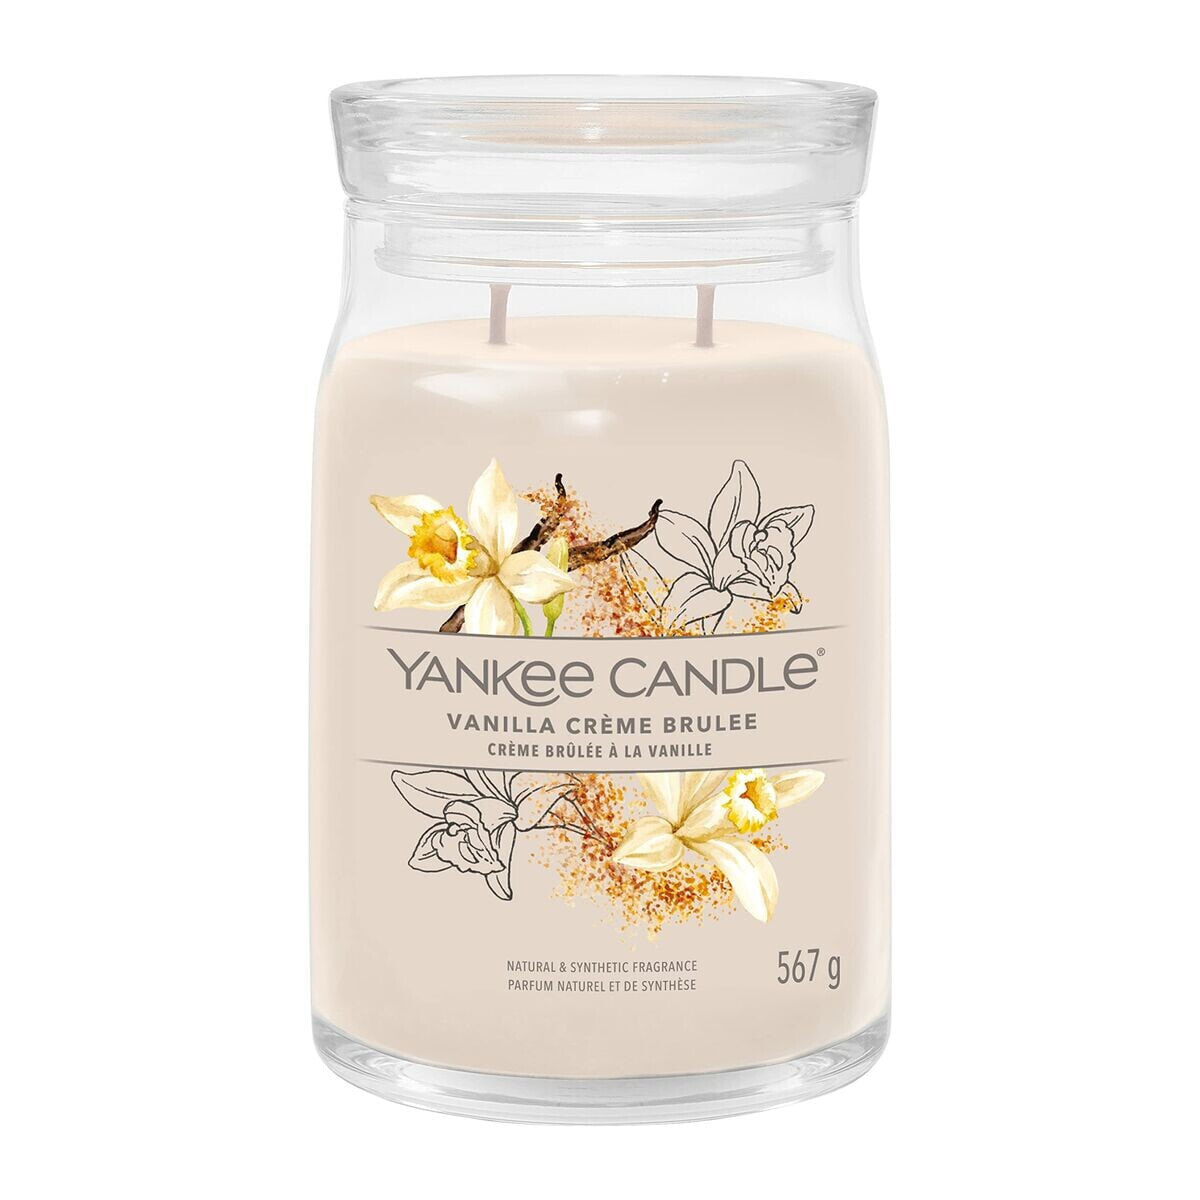 Scented Candle Yankee Candle 567 g Vanilla Crème Brûlée